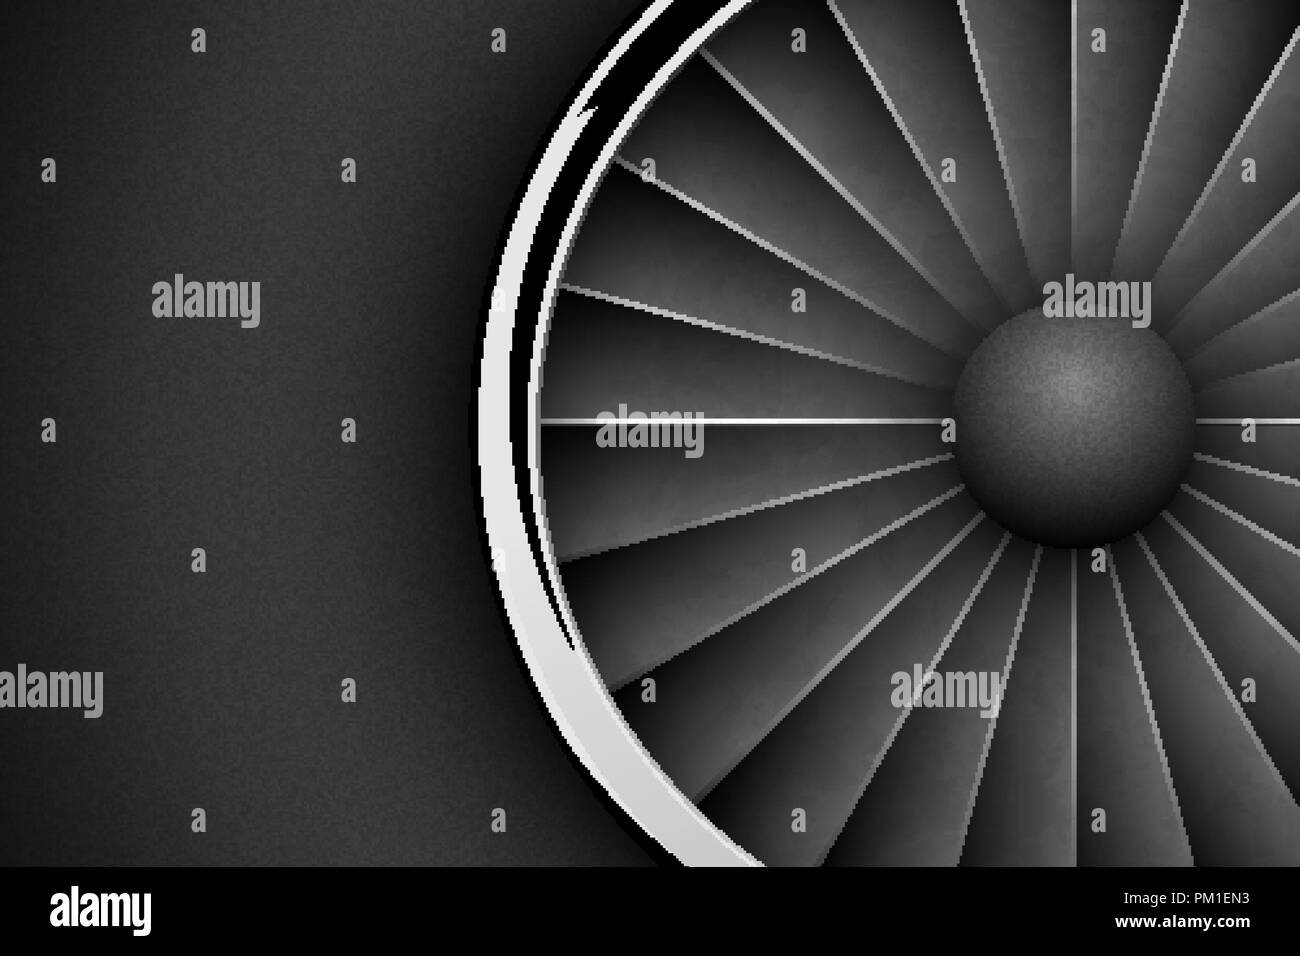 Jet Engine Turbine dark horizontal background. Detailed Airplane Motor with chrome metal ring Front View. Vector illustration aircraft turbo Fan Stock Vector